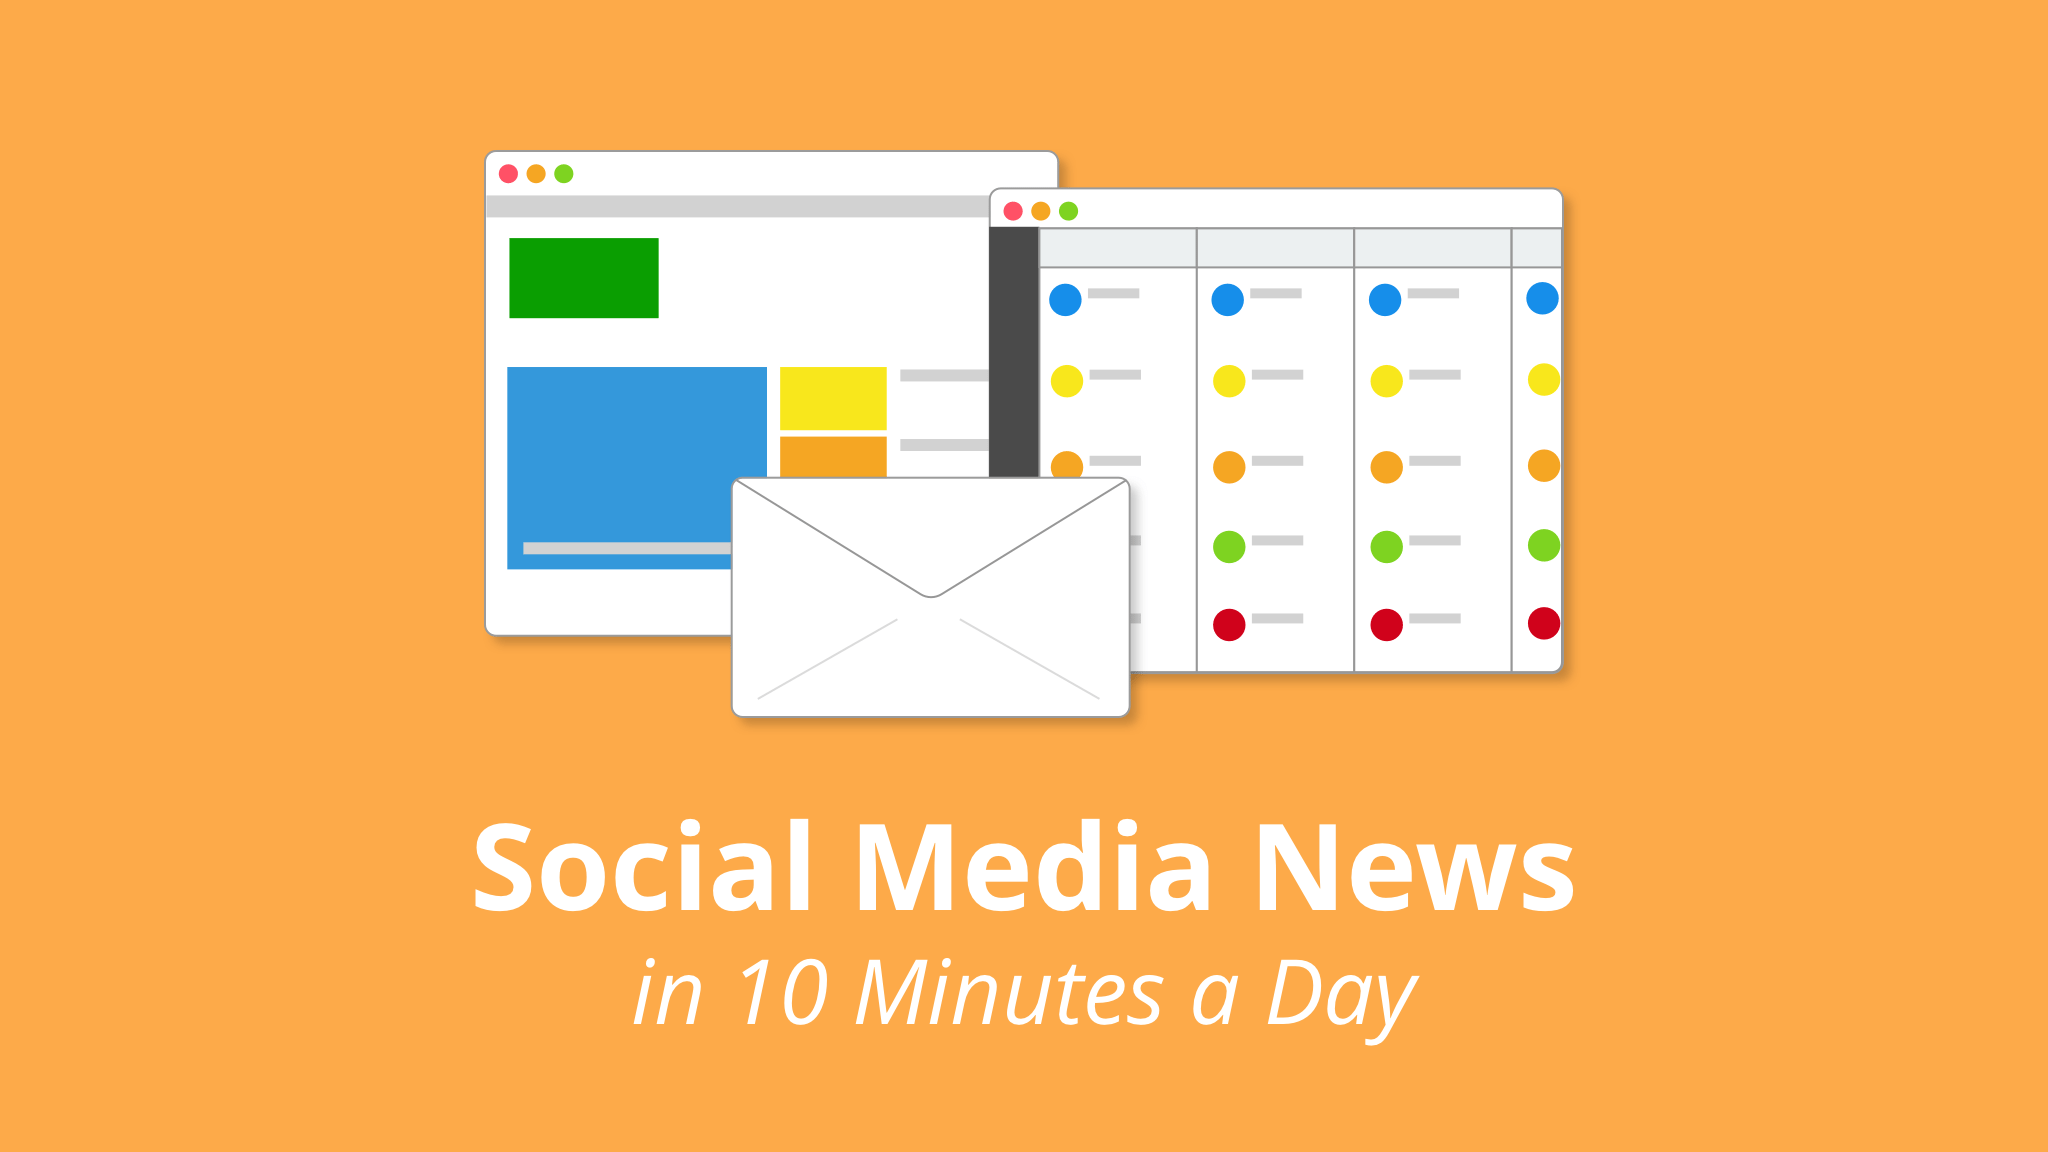 How to Stay Up to Date with Social Media News in 10 Minutes a Day